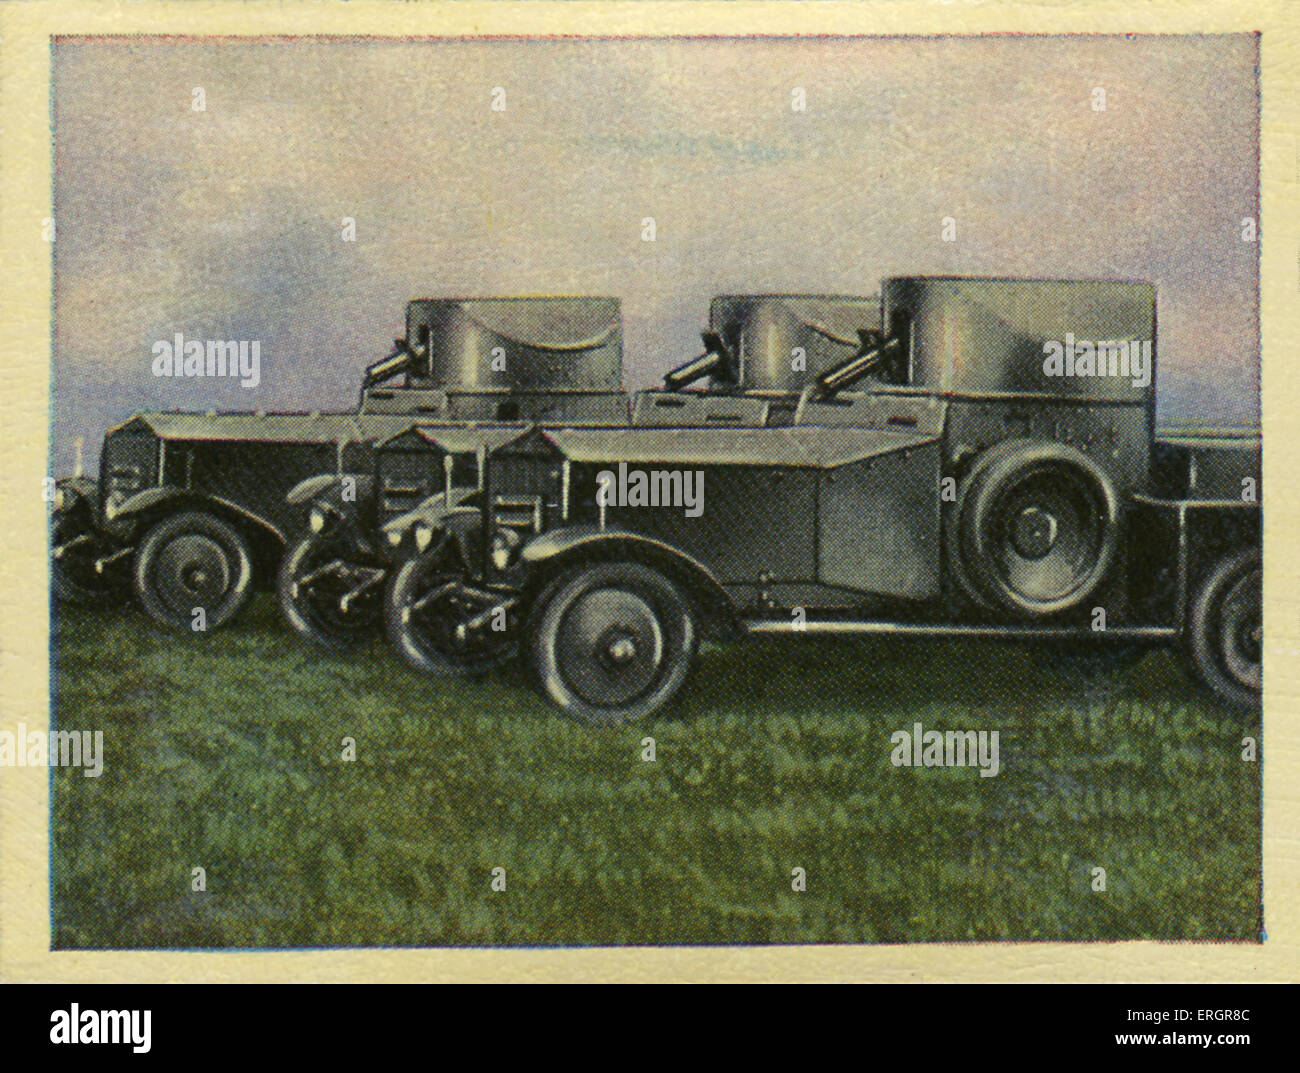 English / British Rolls Royce street tank M.20 with four man crew. Weapons - Vickers machine gun MG installed in rotating tower on the tank. Speed up to 80 kilometres per hour. (Source: Cigarette cards published in Germany c.1934 reviewing military equipment in arms race prior to WW2) Stock Photo